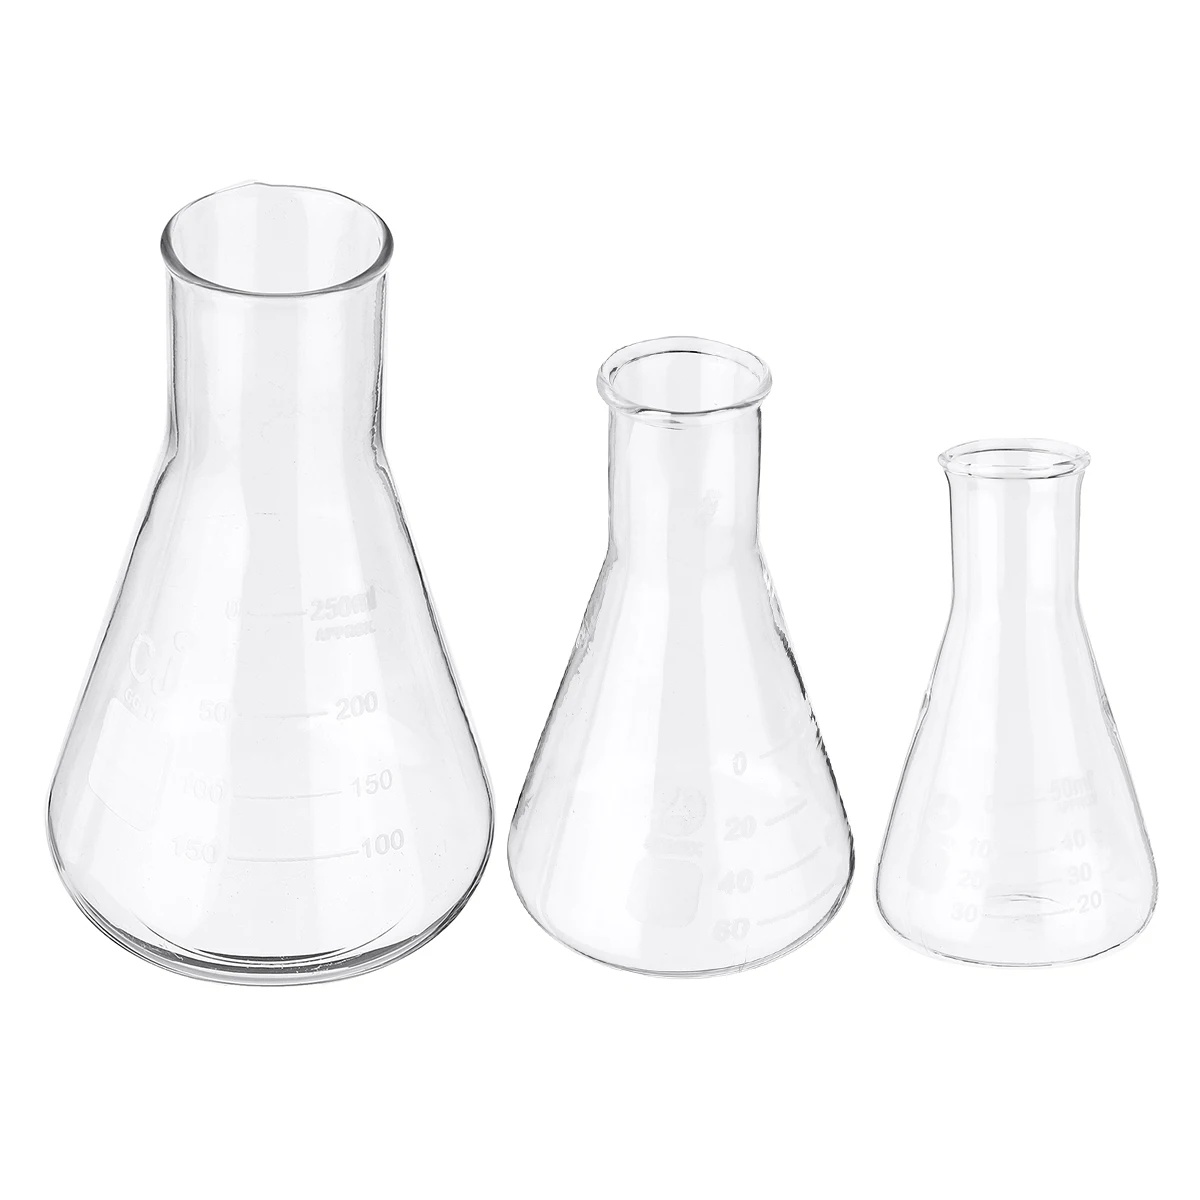 

KICUTE 50-250ml Flat Bottom Conical Glass Flask Transparent Scientific Erlenmeyer Lab Teaching Chemical Experiments vessels